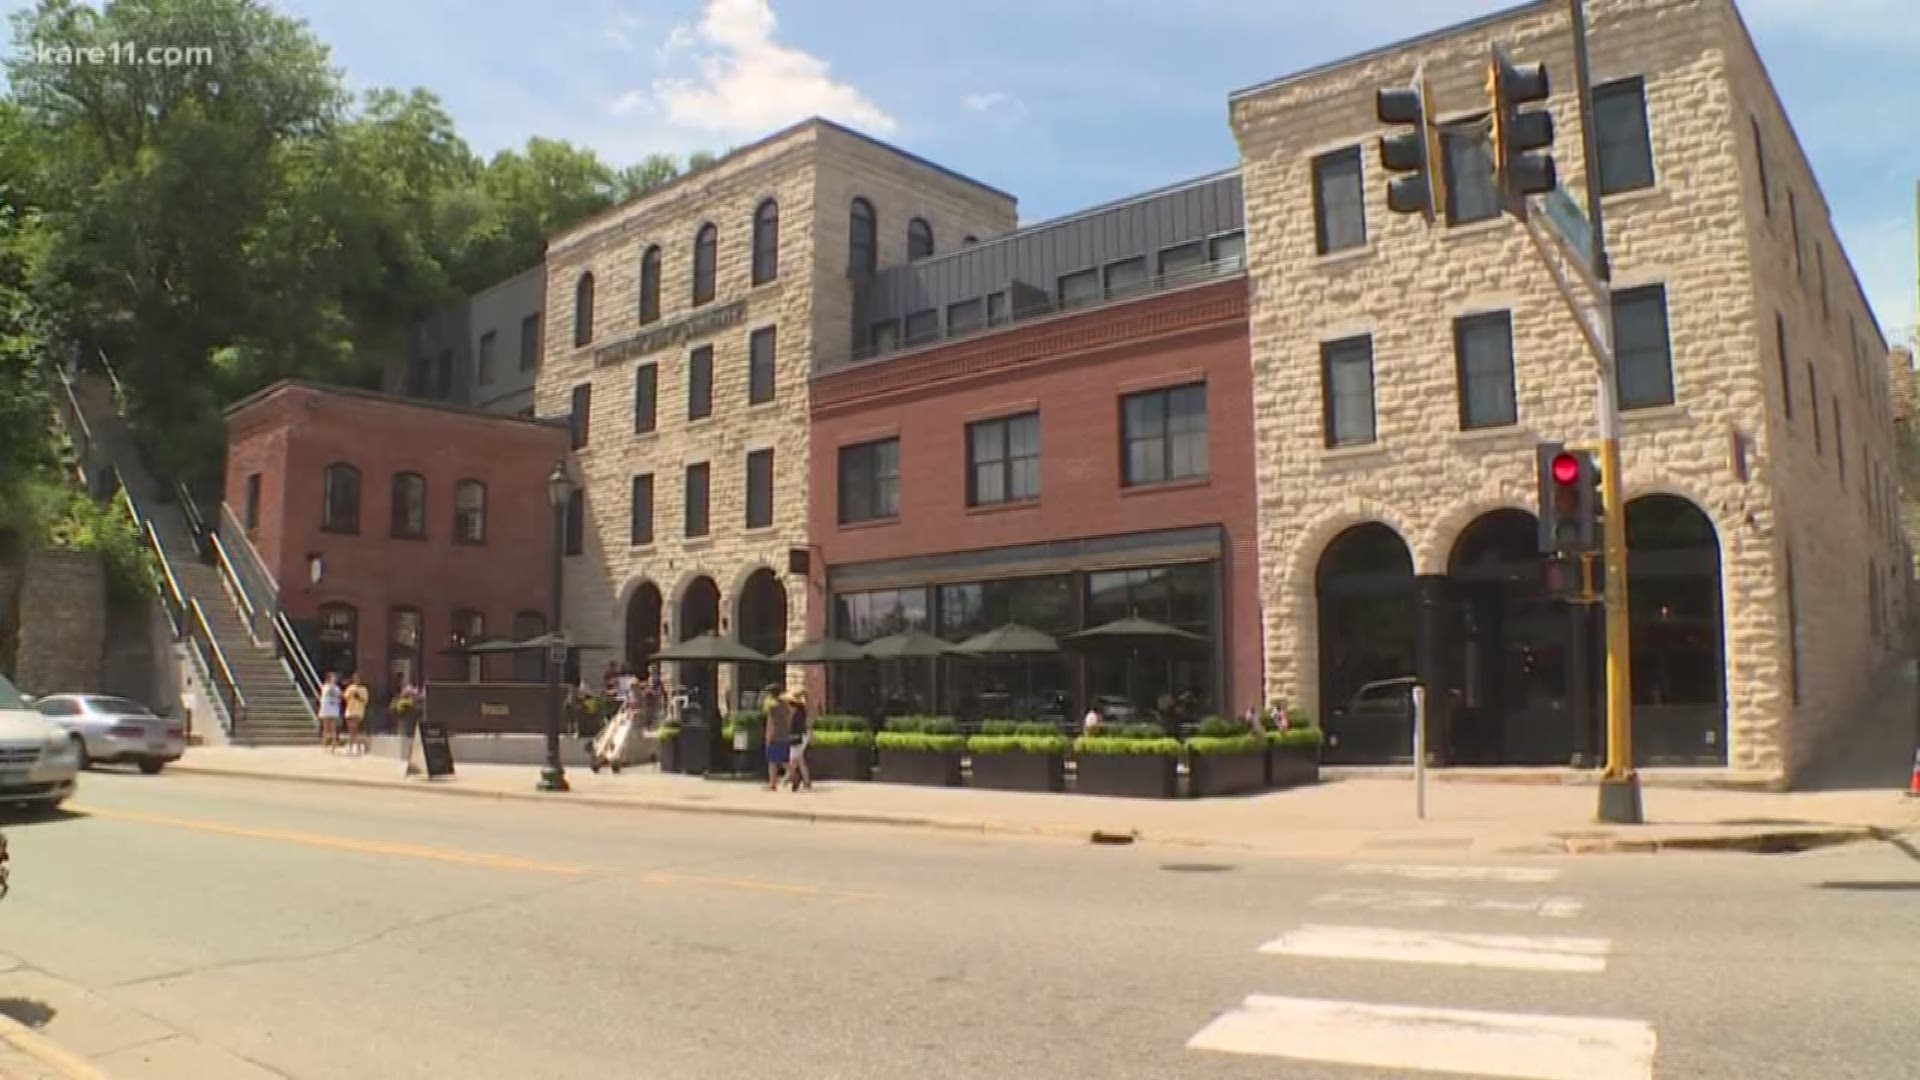 The new hotel and restaurant honors the history of Stillwater in a modern setting.